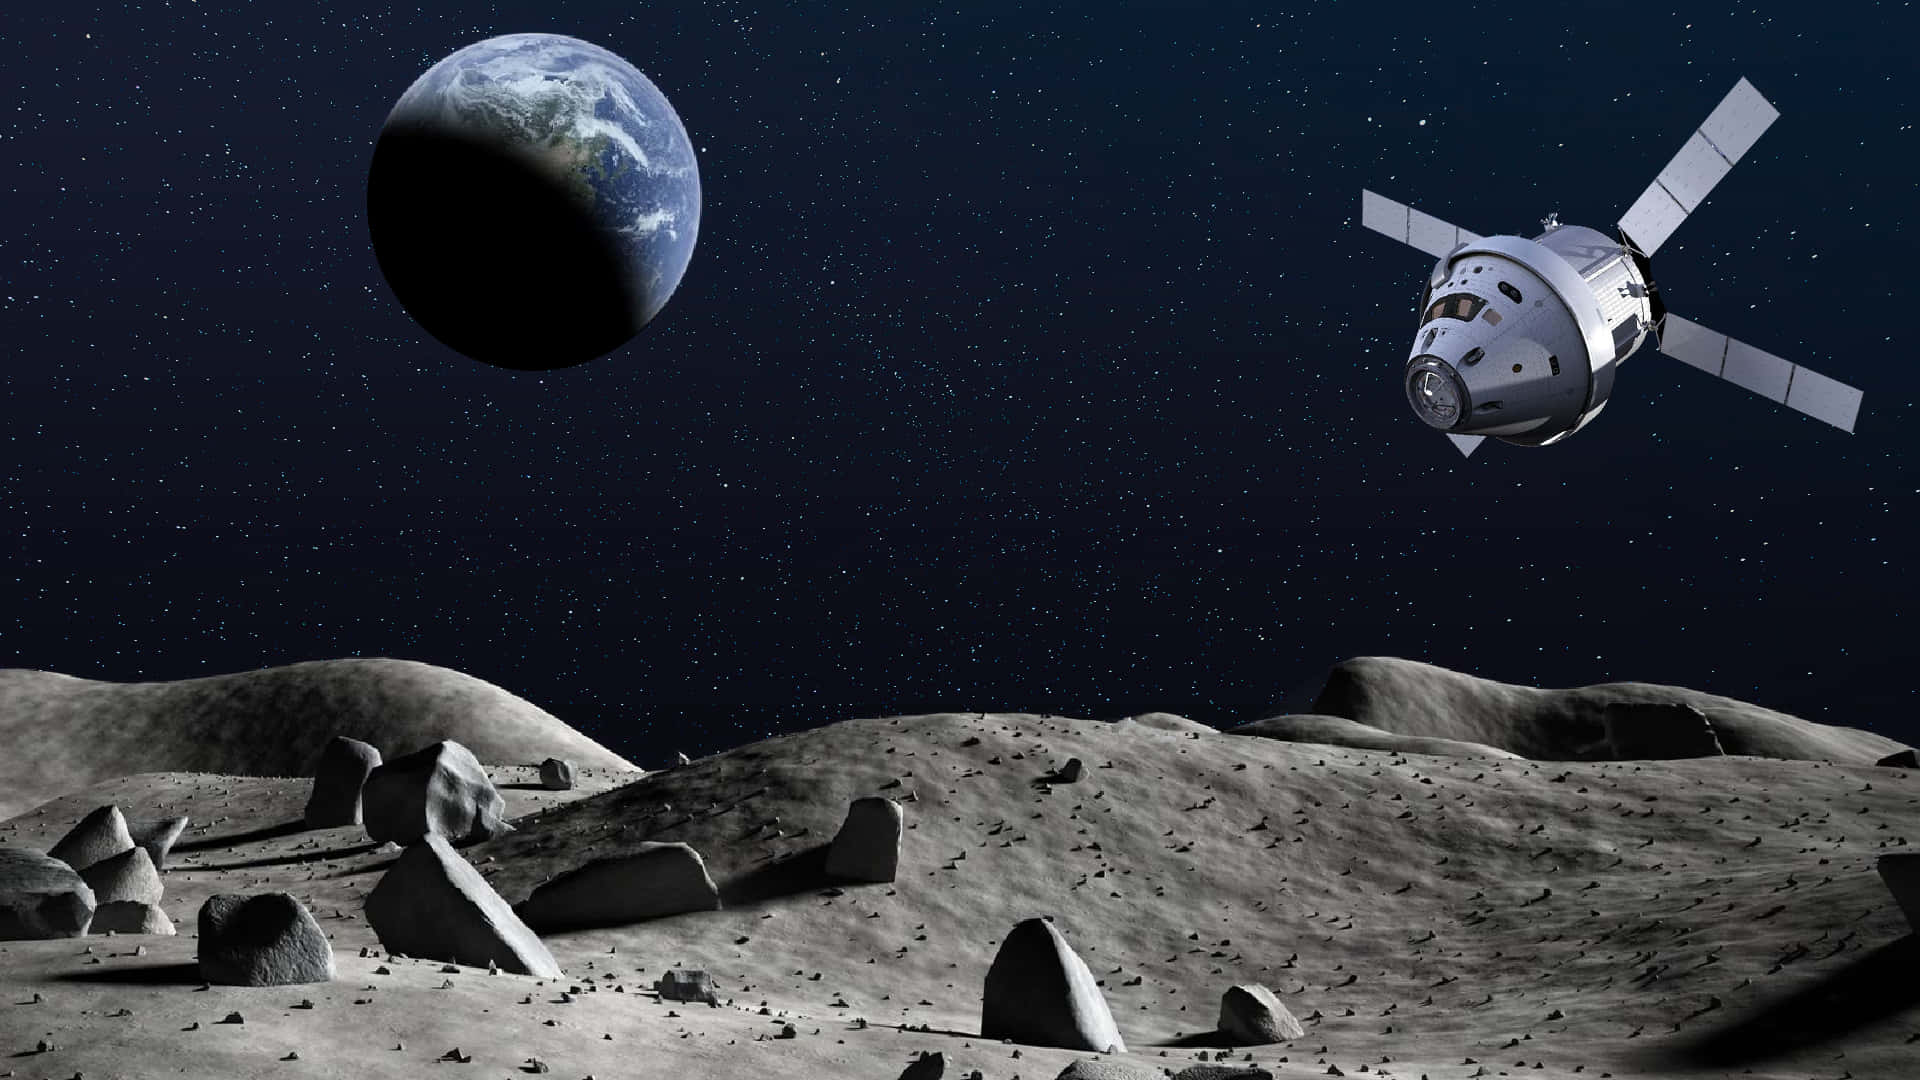 A Spacecraft Is Flying Over The Moon With Rocks In The Background